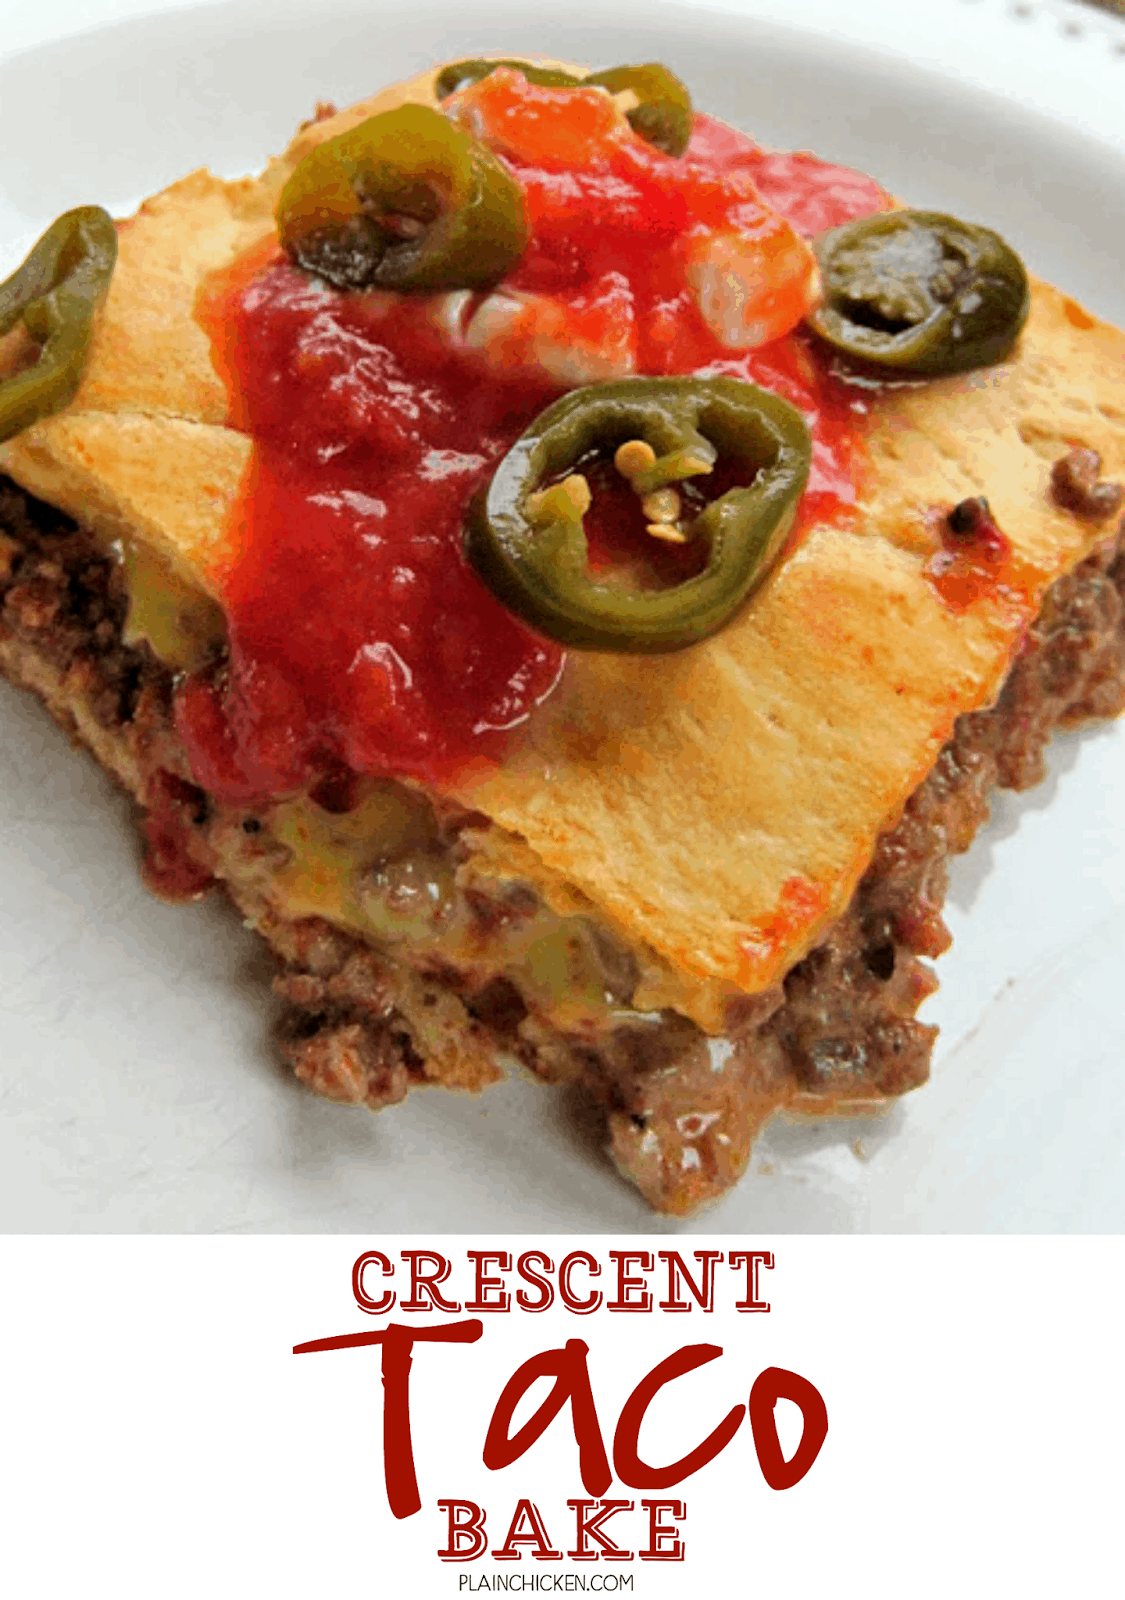 Crescent Taco Bake Recipe - Taco Meat, rotel and velveeta baked in crescent rolls - super quick and easy Mexican recipe. Only 5 ingredients! Top with your favorite taco toppings.